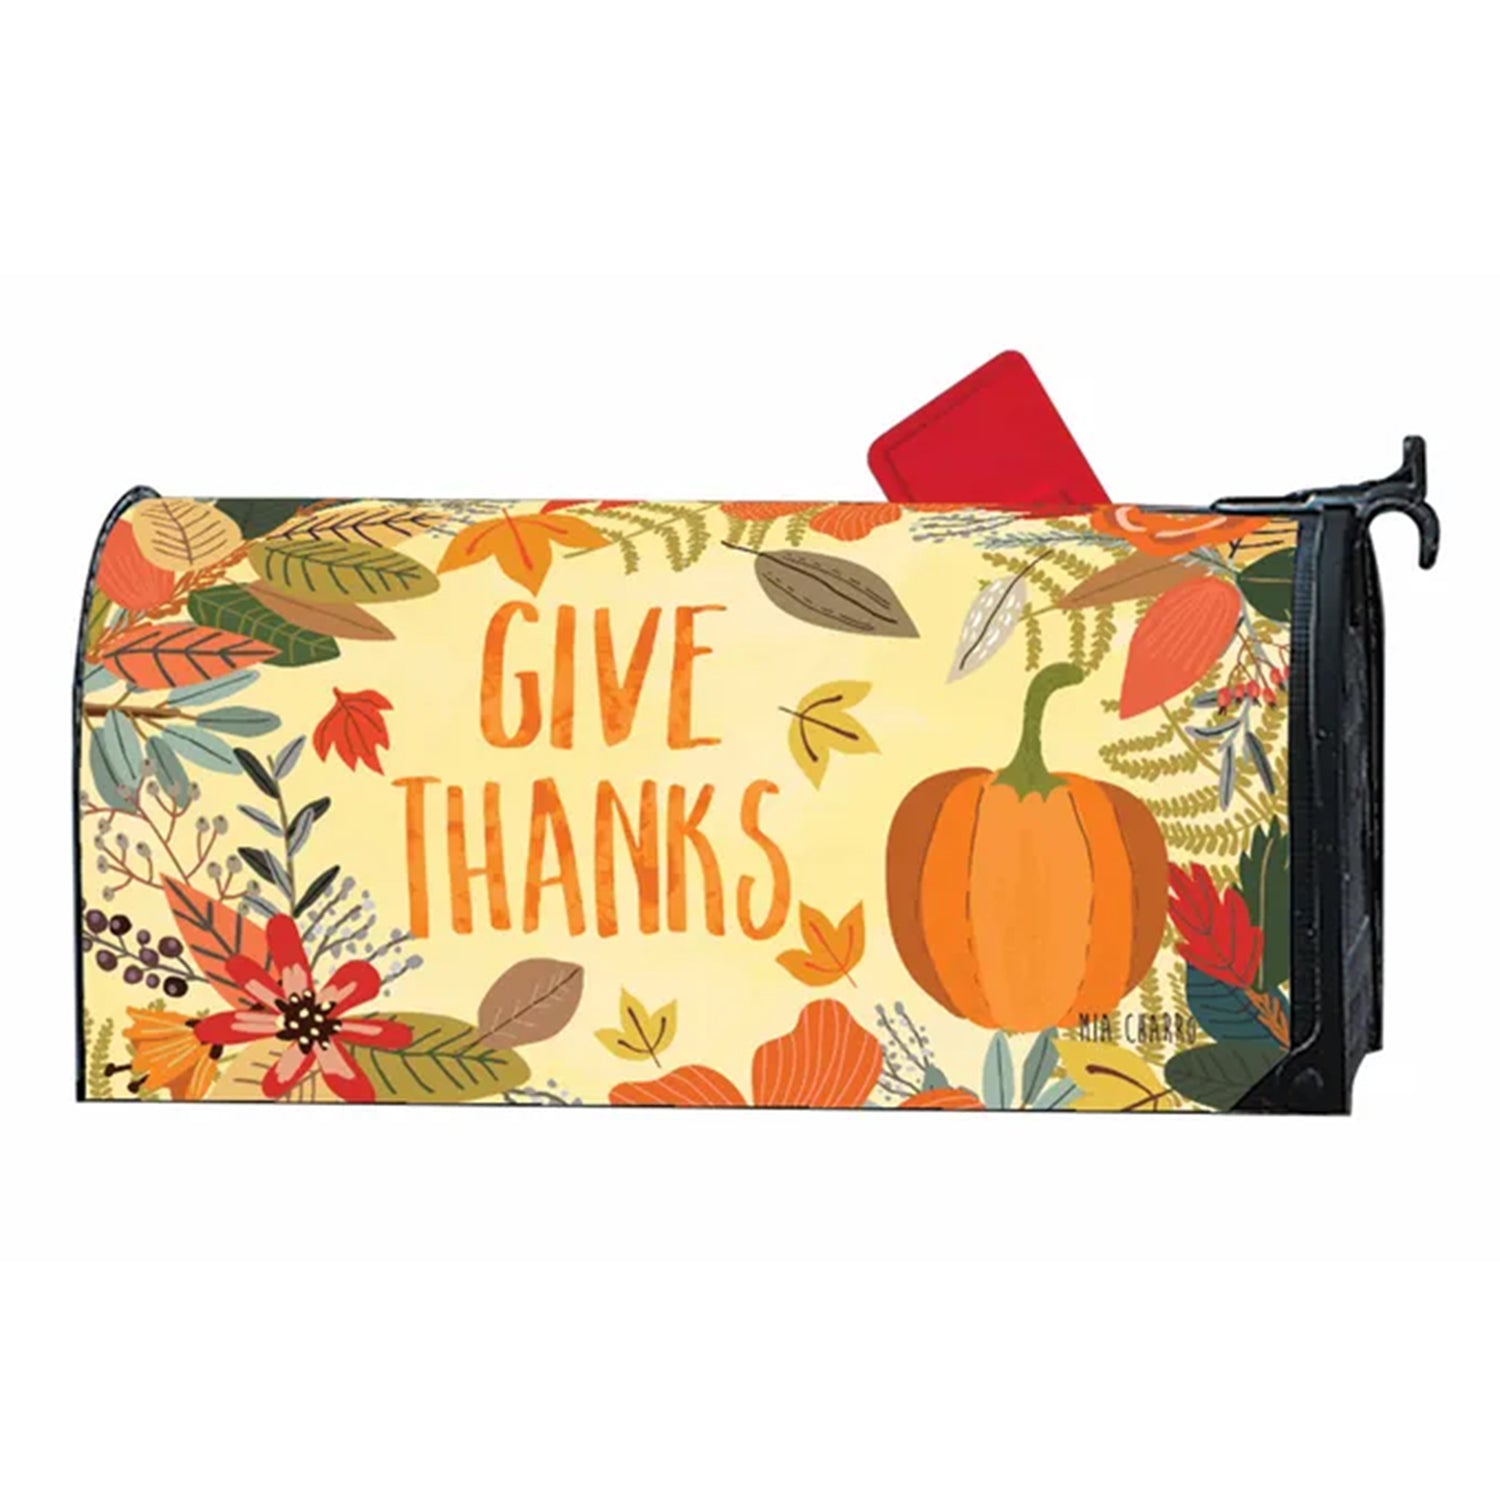 We Give Thanks Large Mailwrap